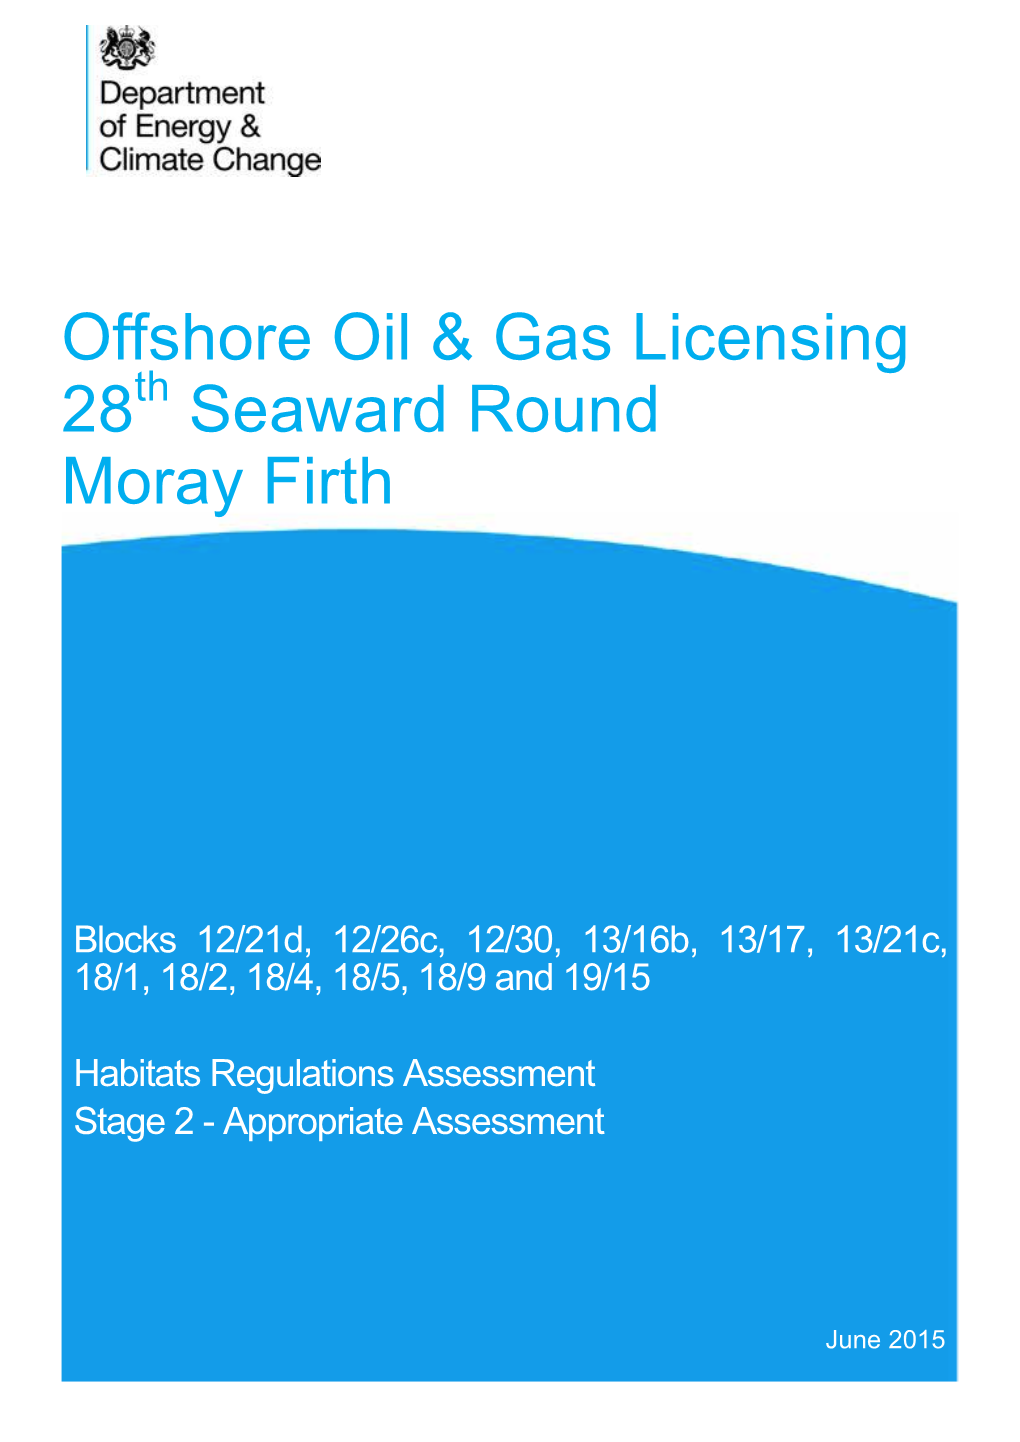 Offshore Oil & Gas Licensing 28 Seaward Round Moray Firth